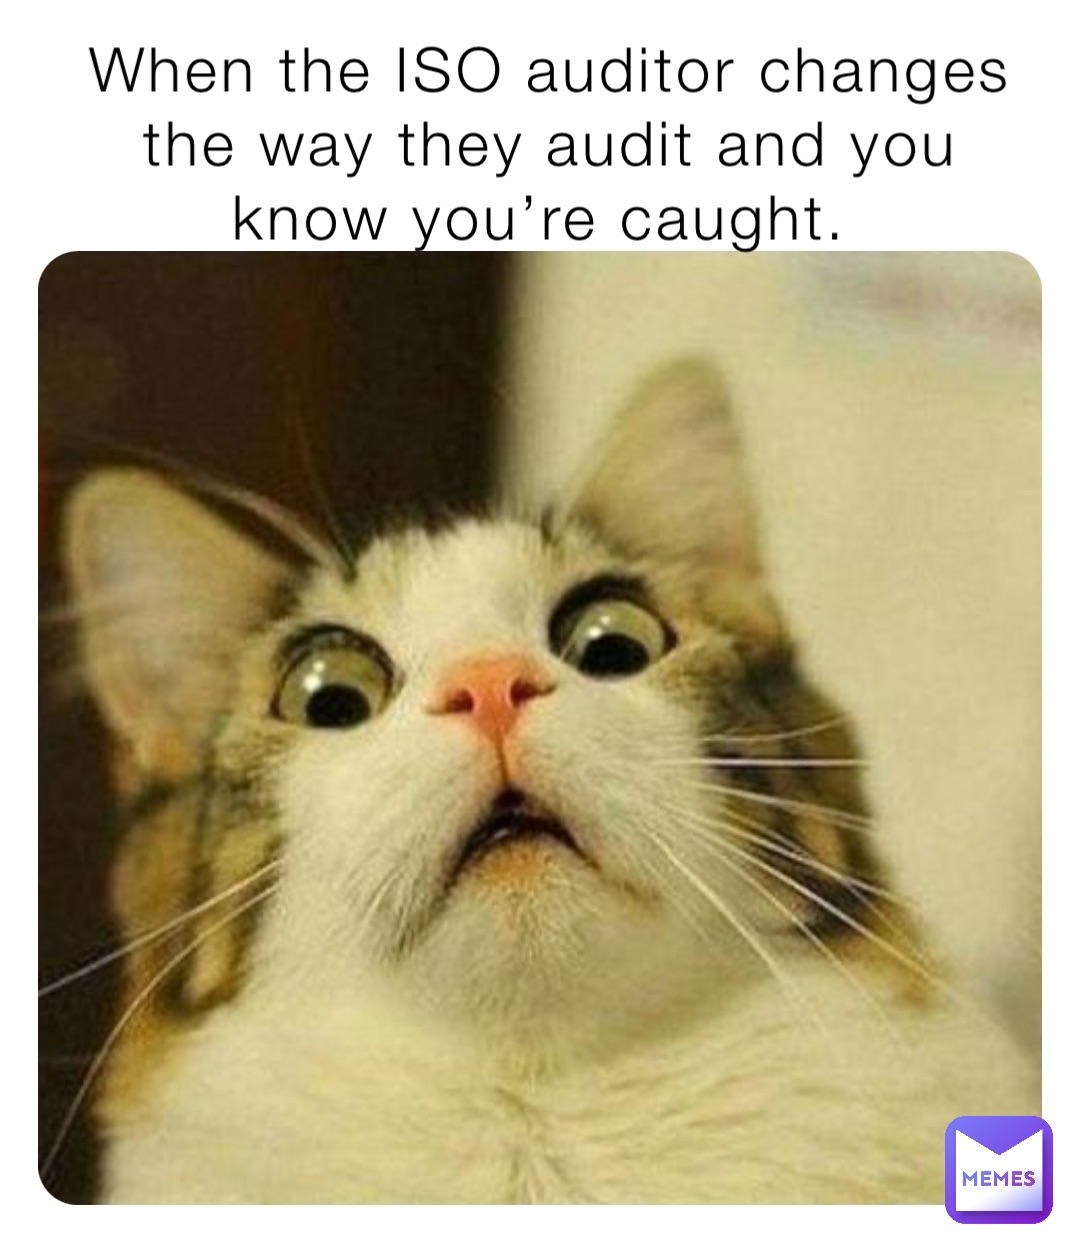 When the ISO auditor changes the way they audit and you know you’re caught.